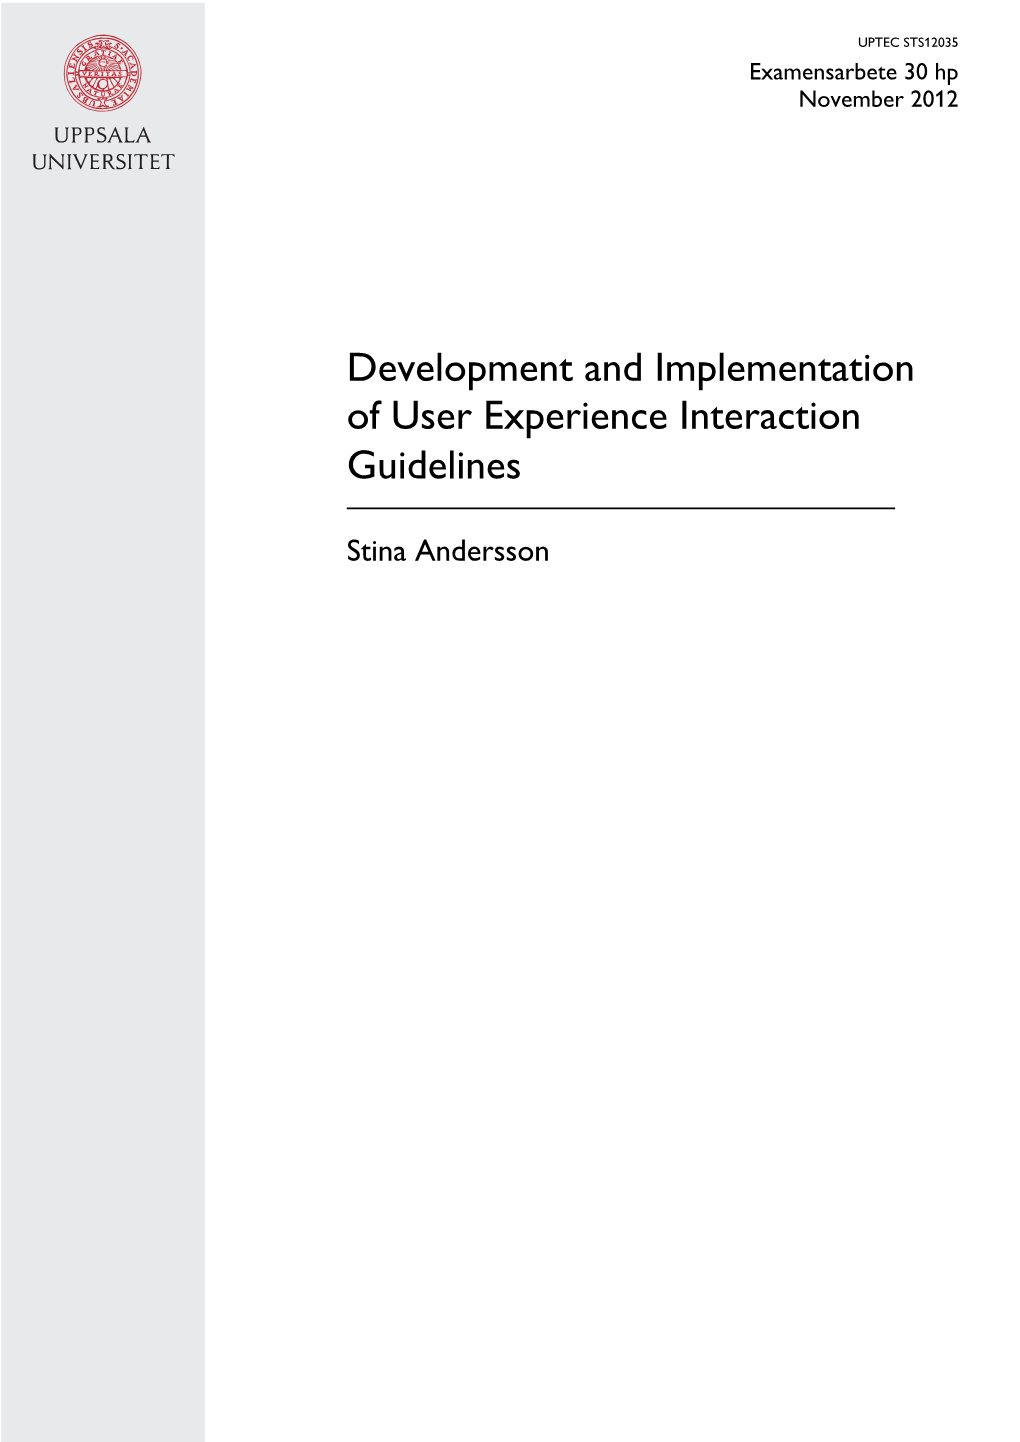 Development and Implementation of User Experience Interaction Guidelines